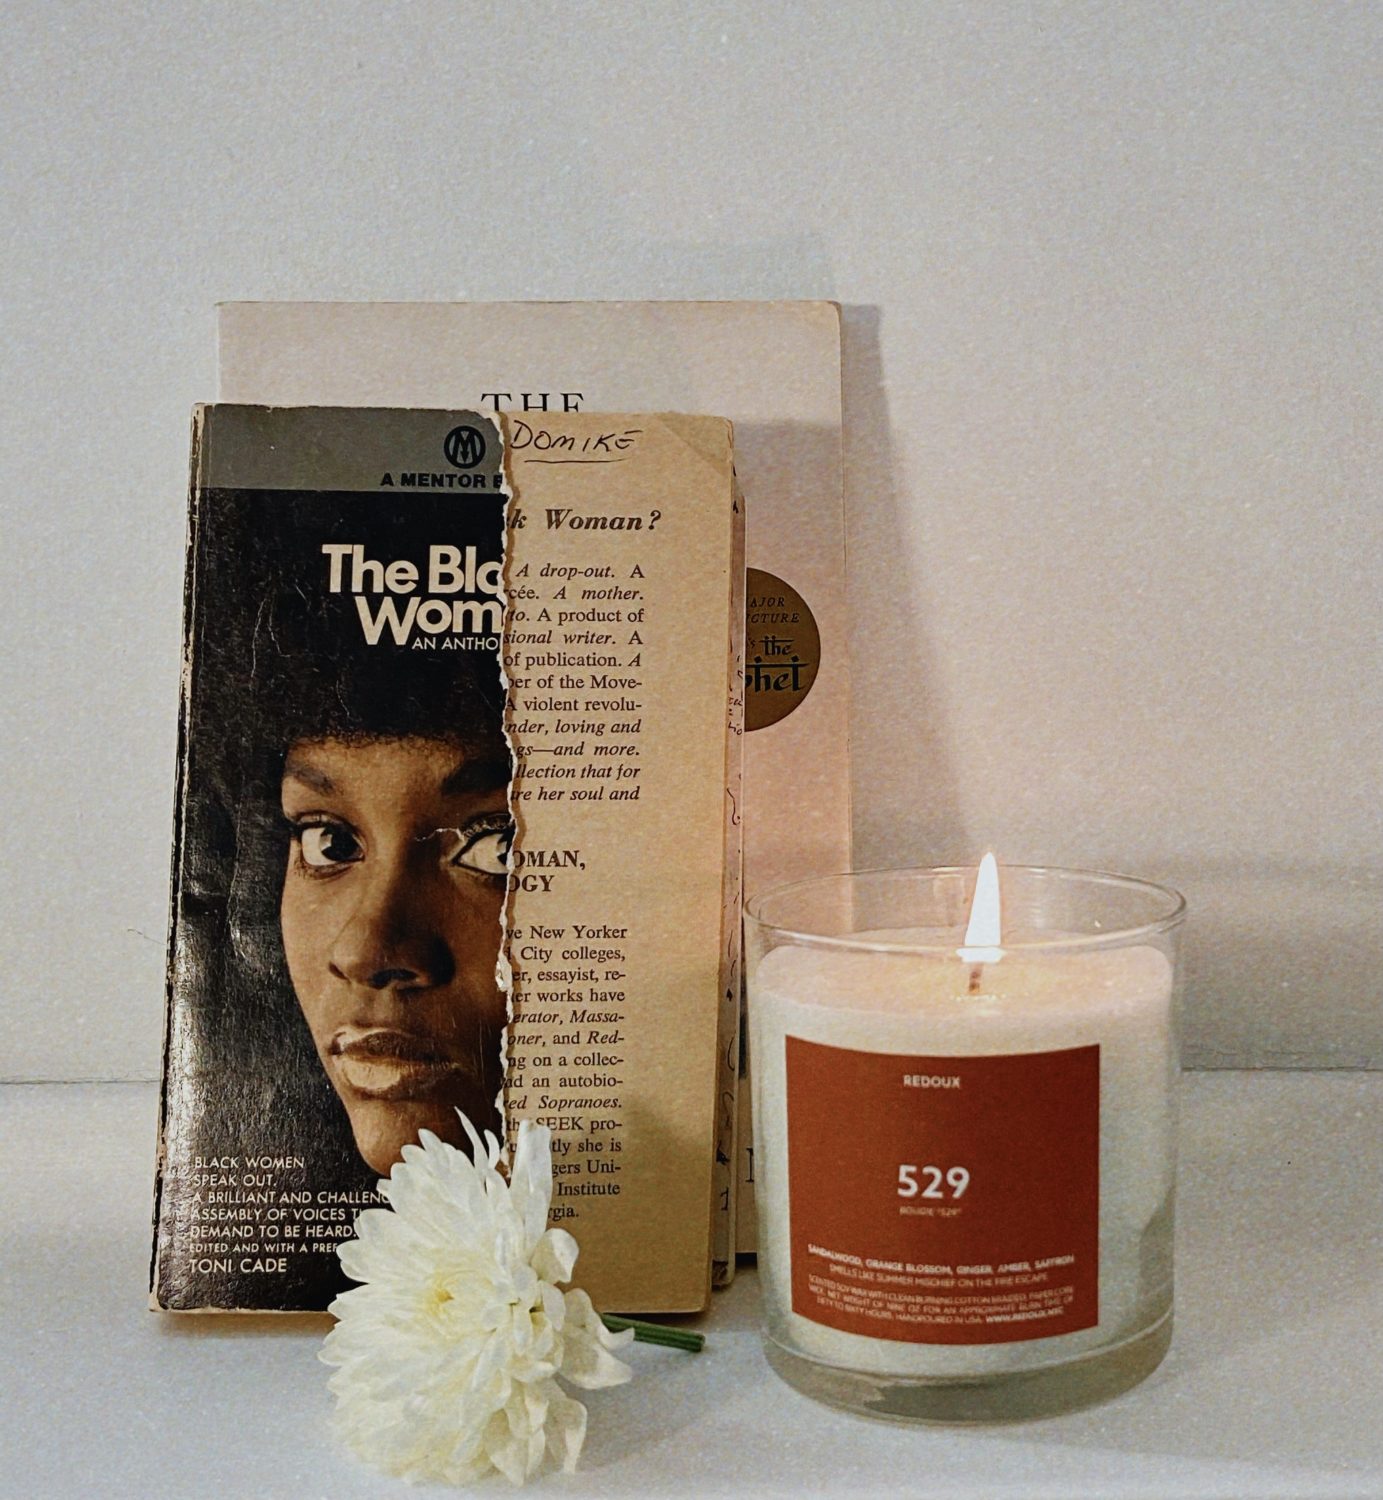 Redoux brand vegan skincare candle, styled next to book called the black woman because brand is a black owned brand